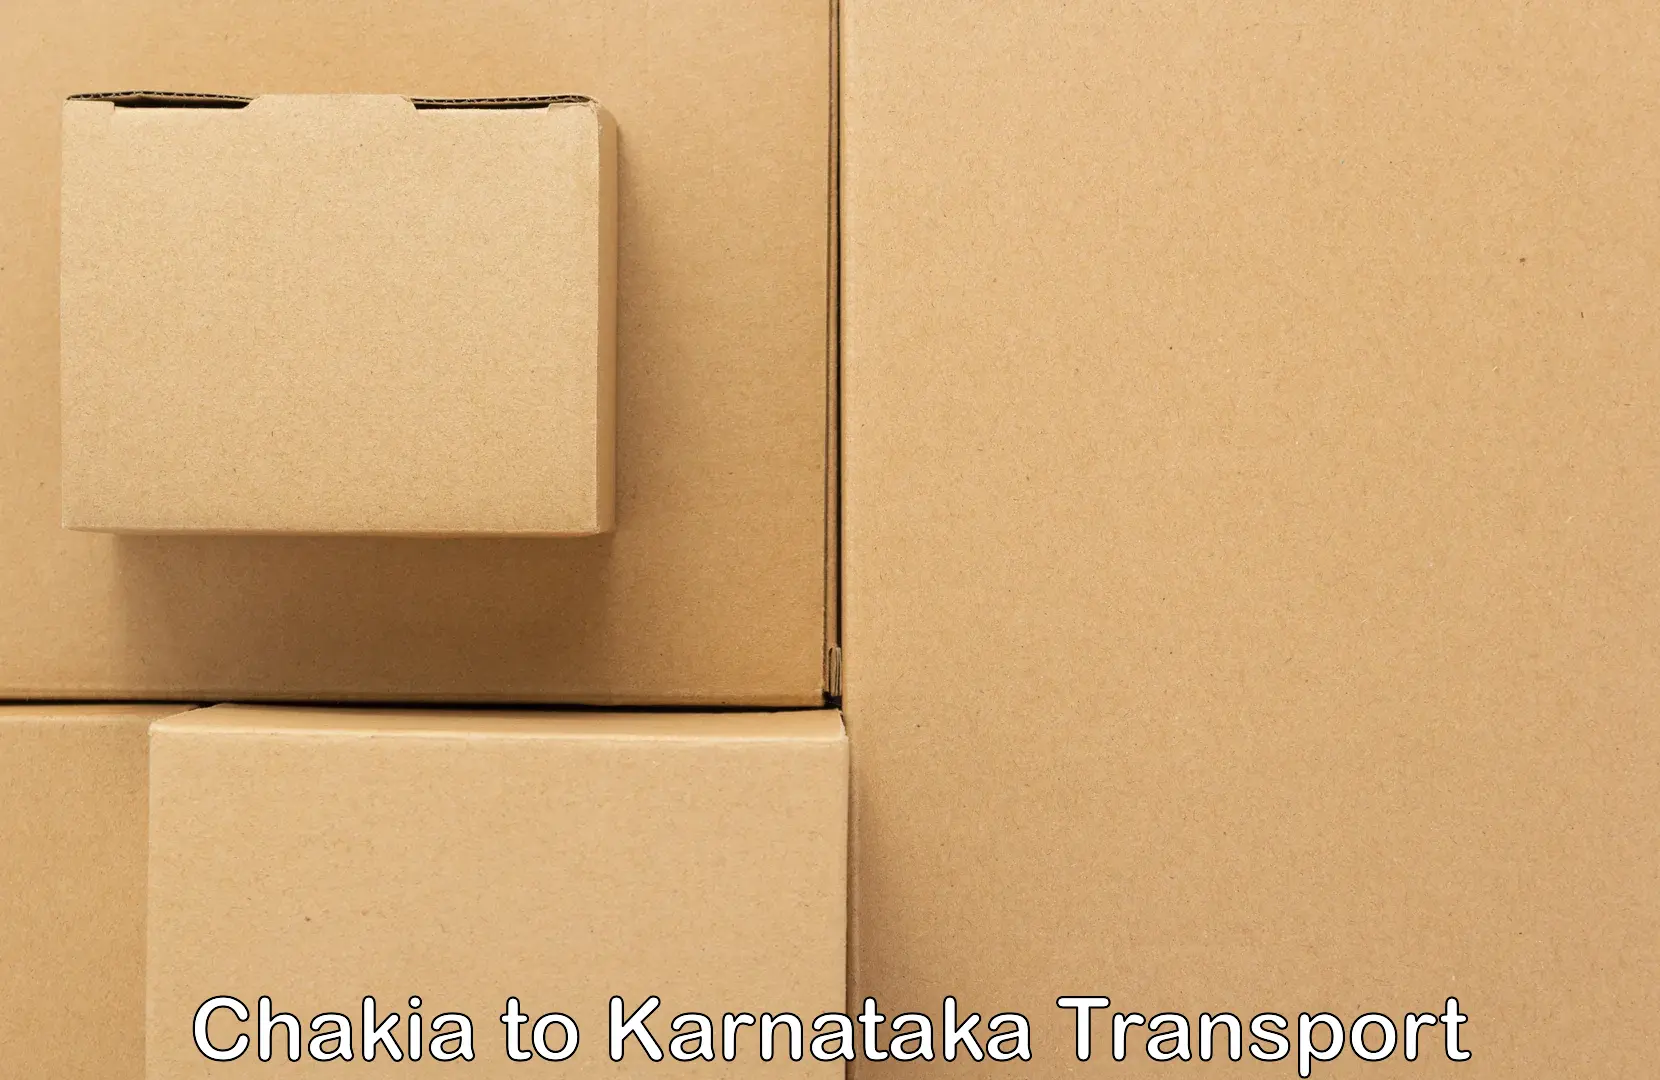 Goods delivery service Chakia to Channagiri